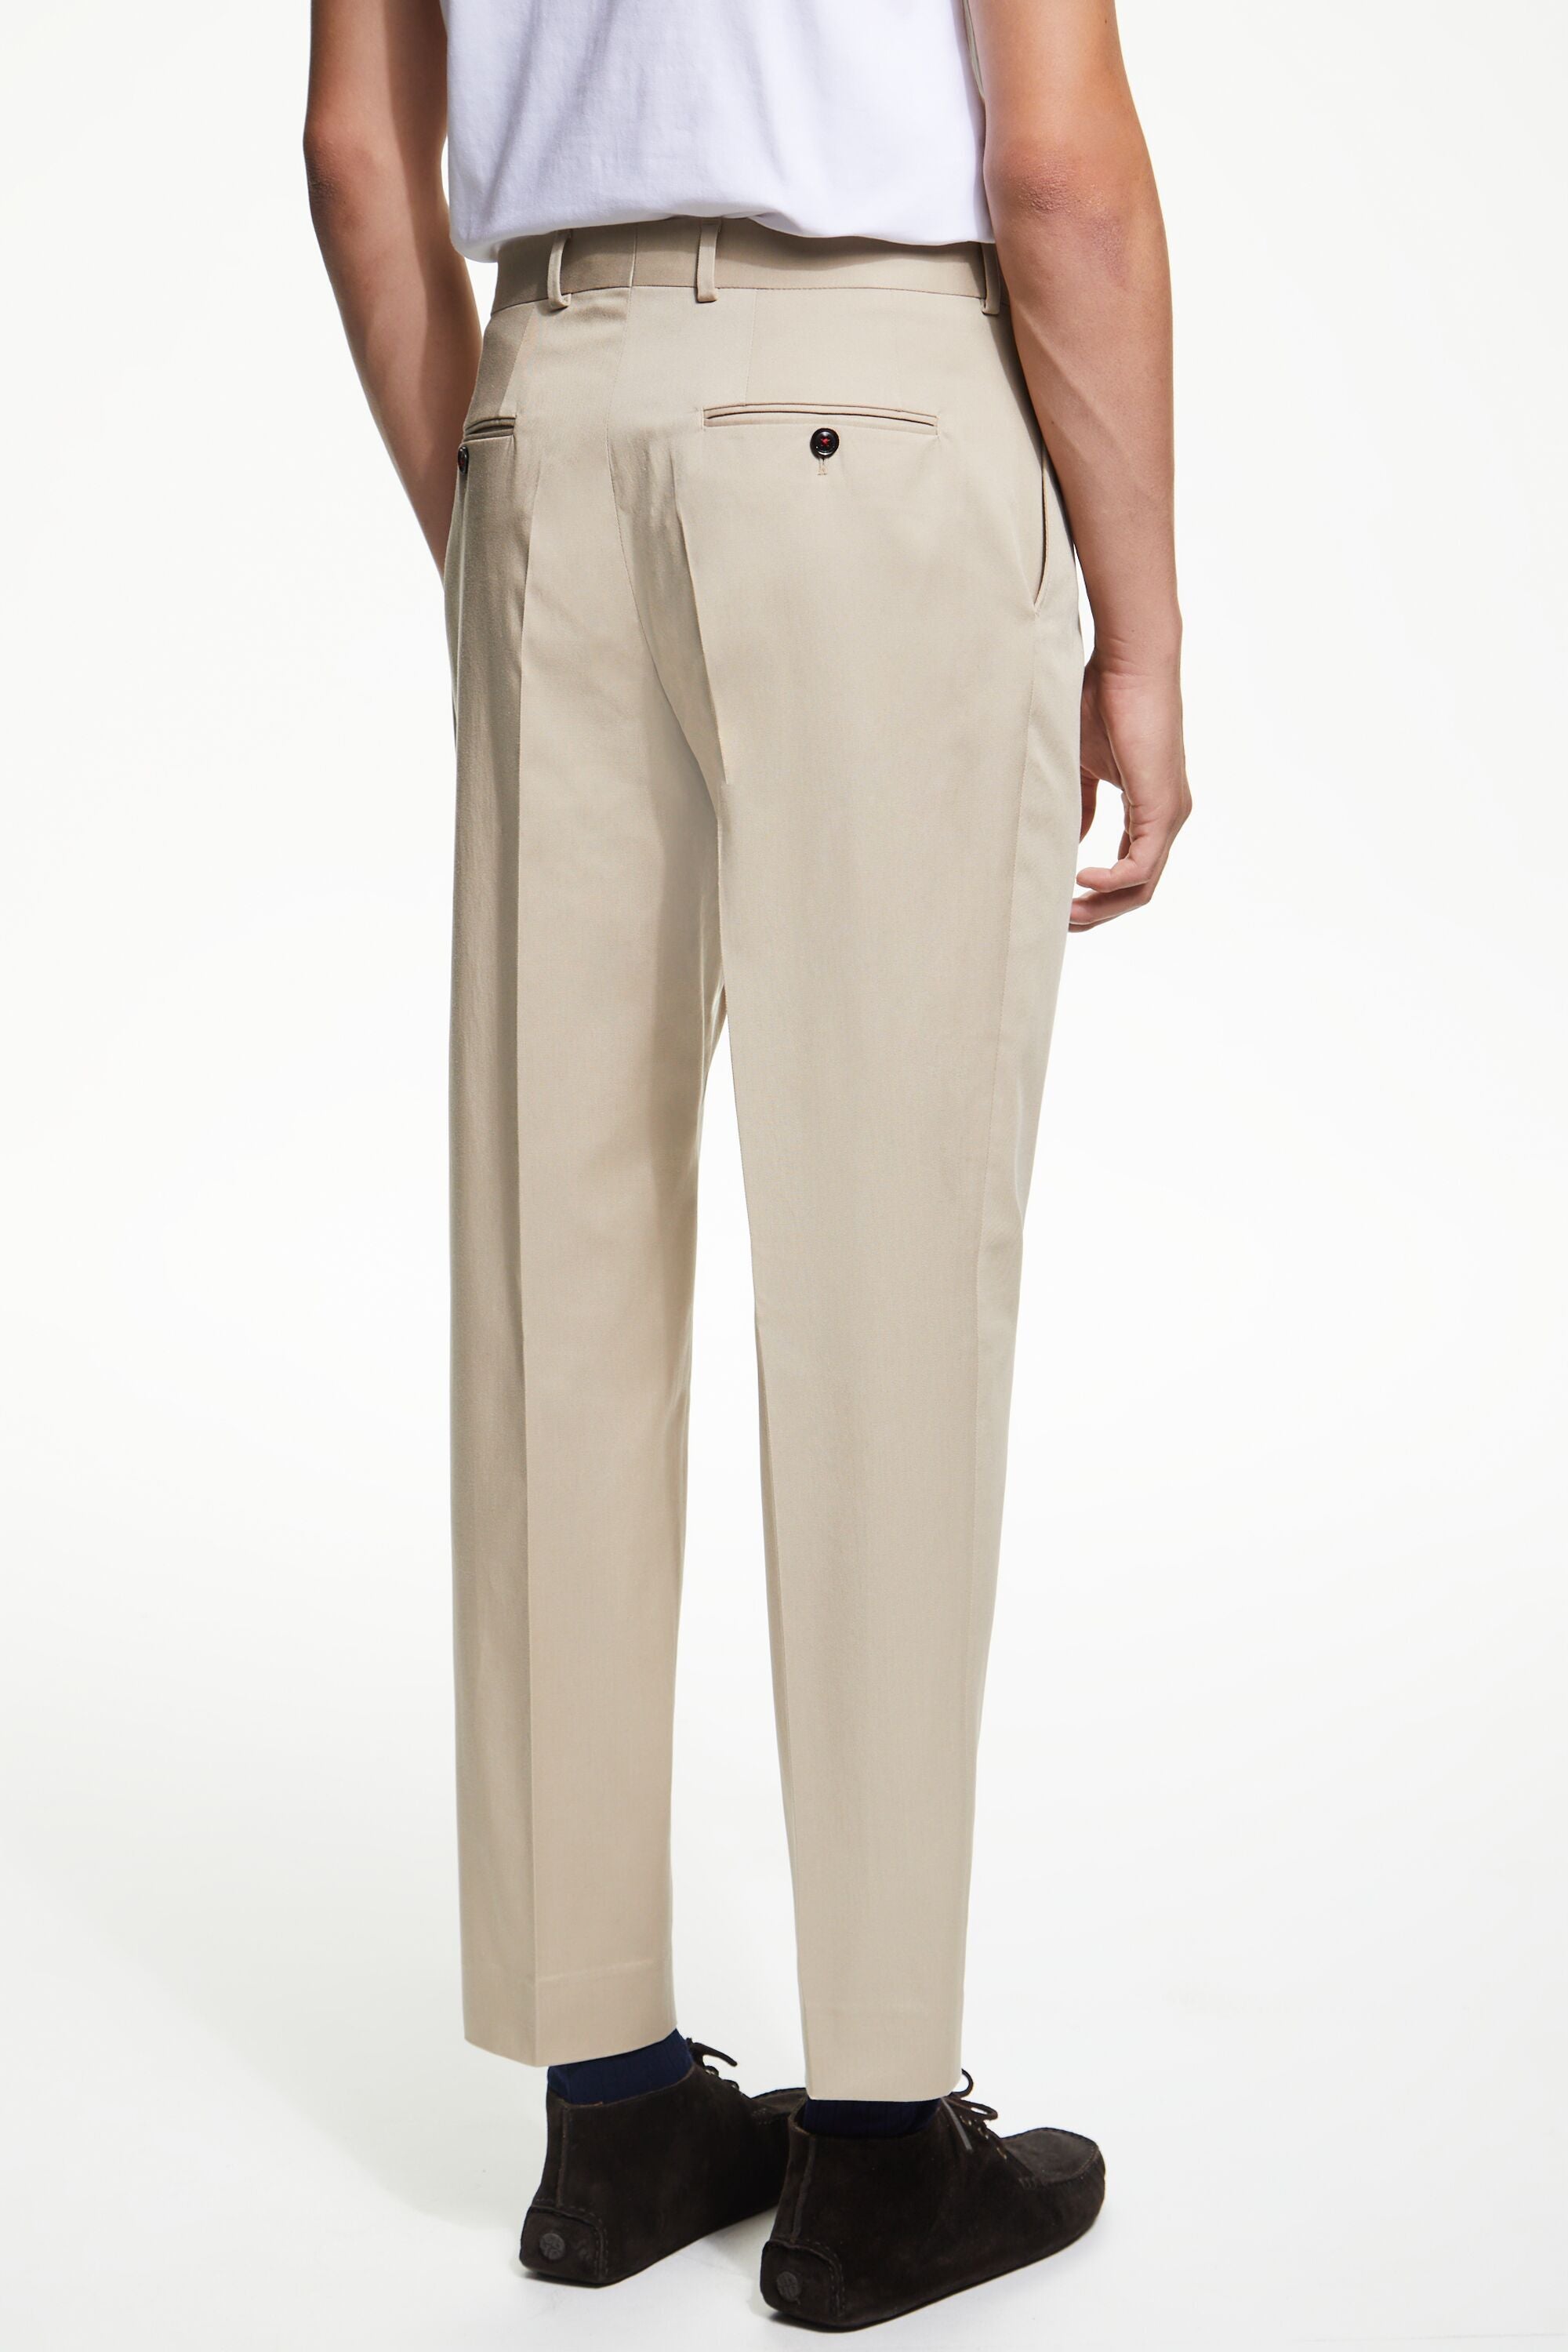 Camel Corduroy Relaxed Fit Pant